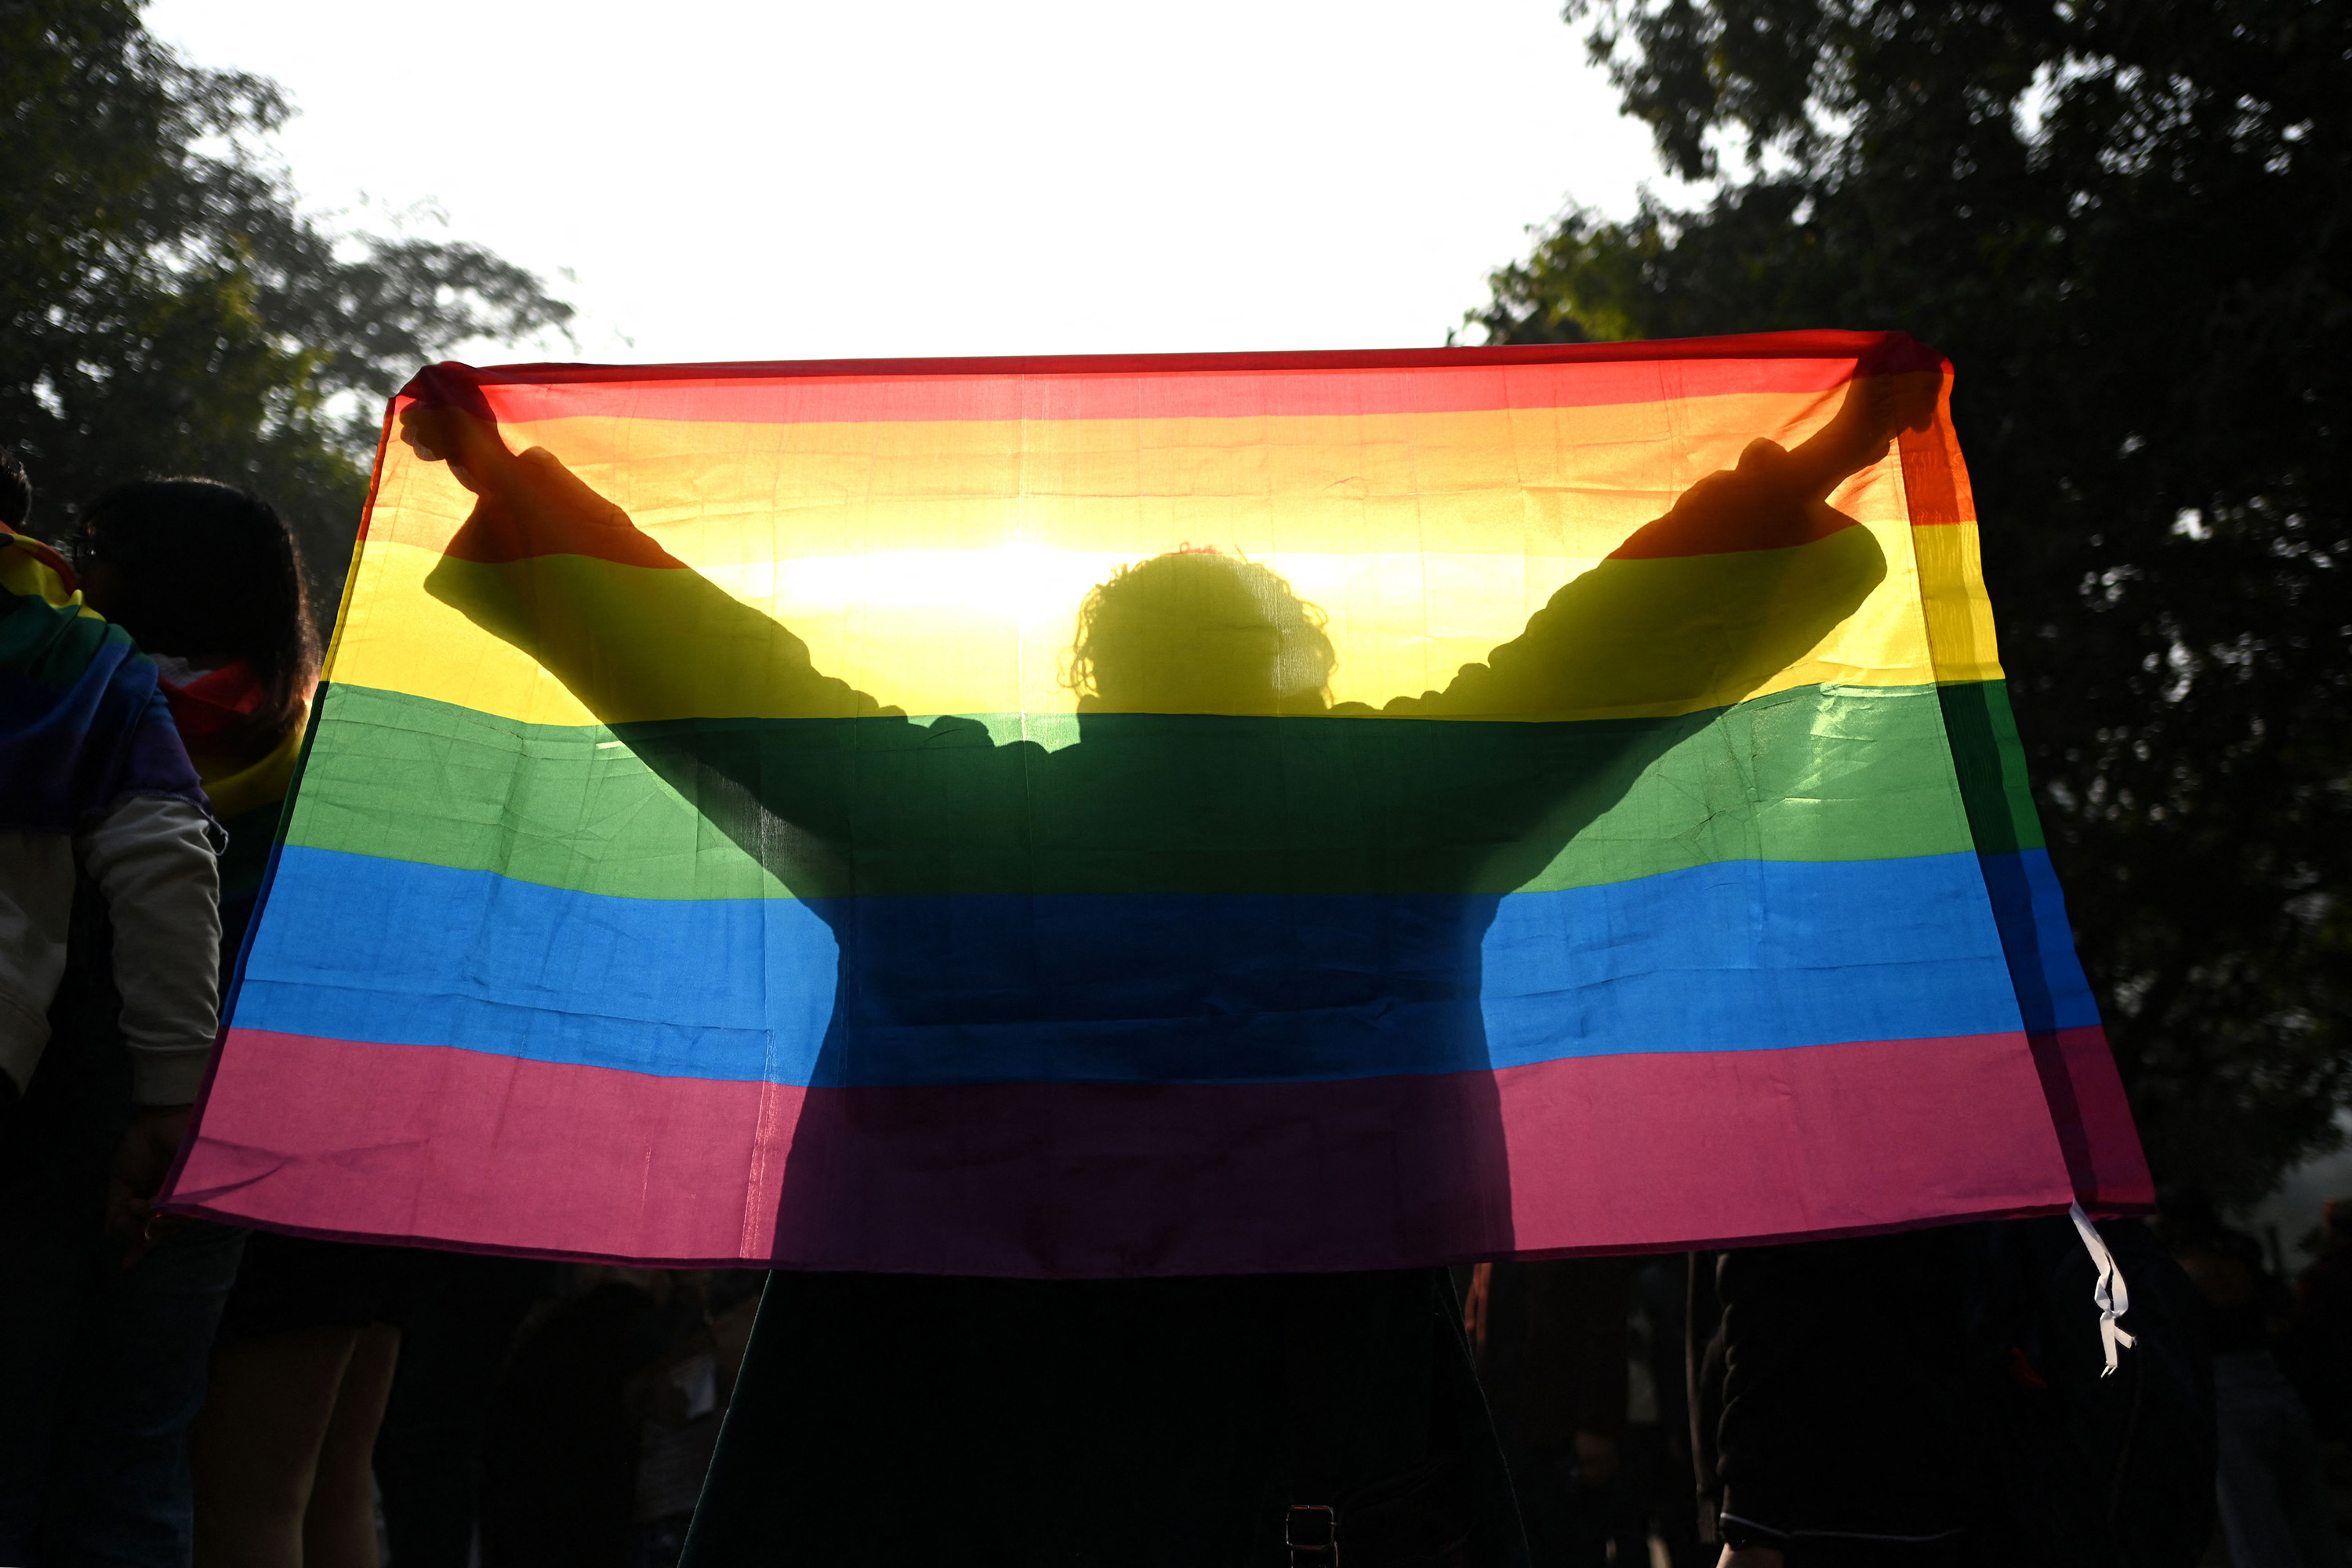 LGBTQ+ activists call for new strategies to promote equality after